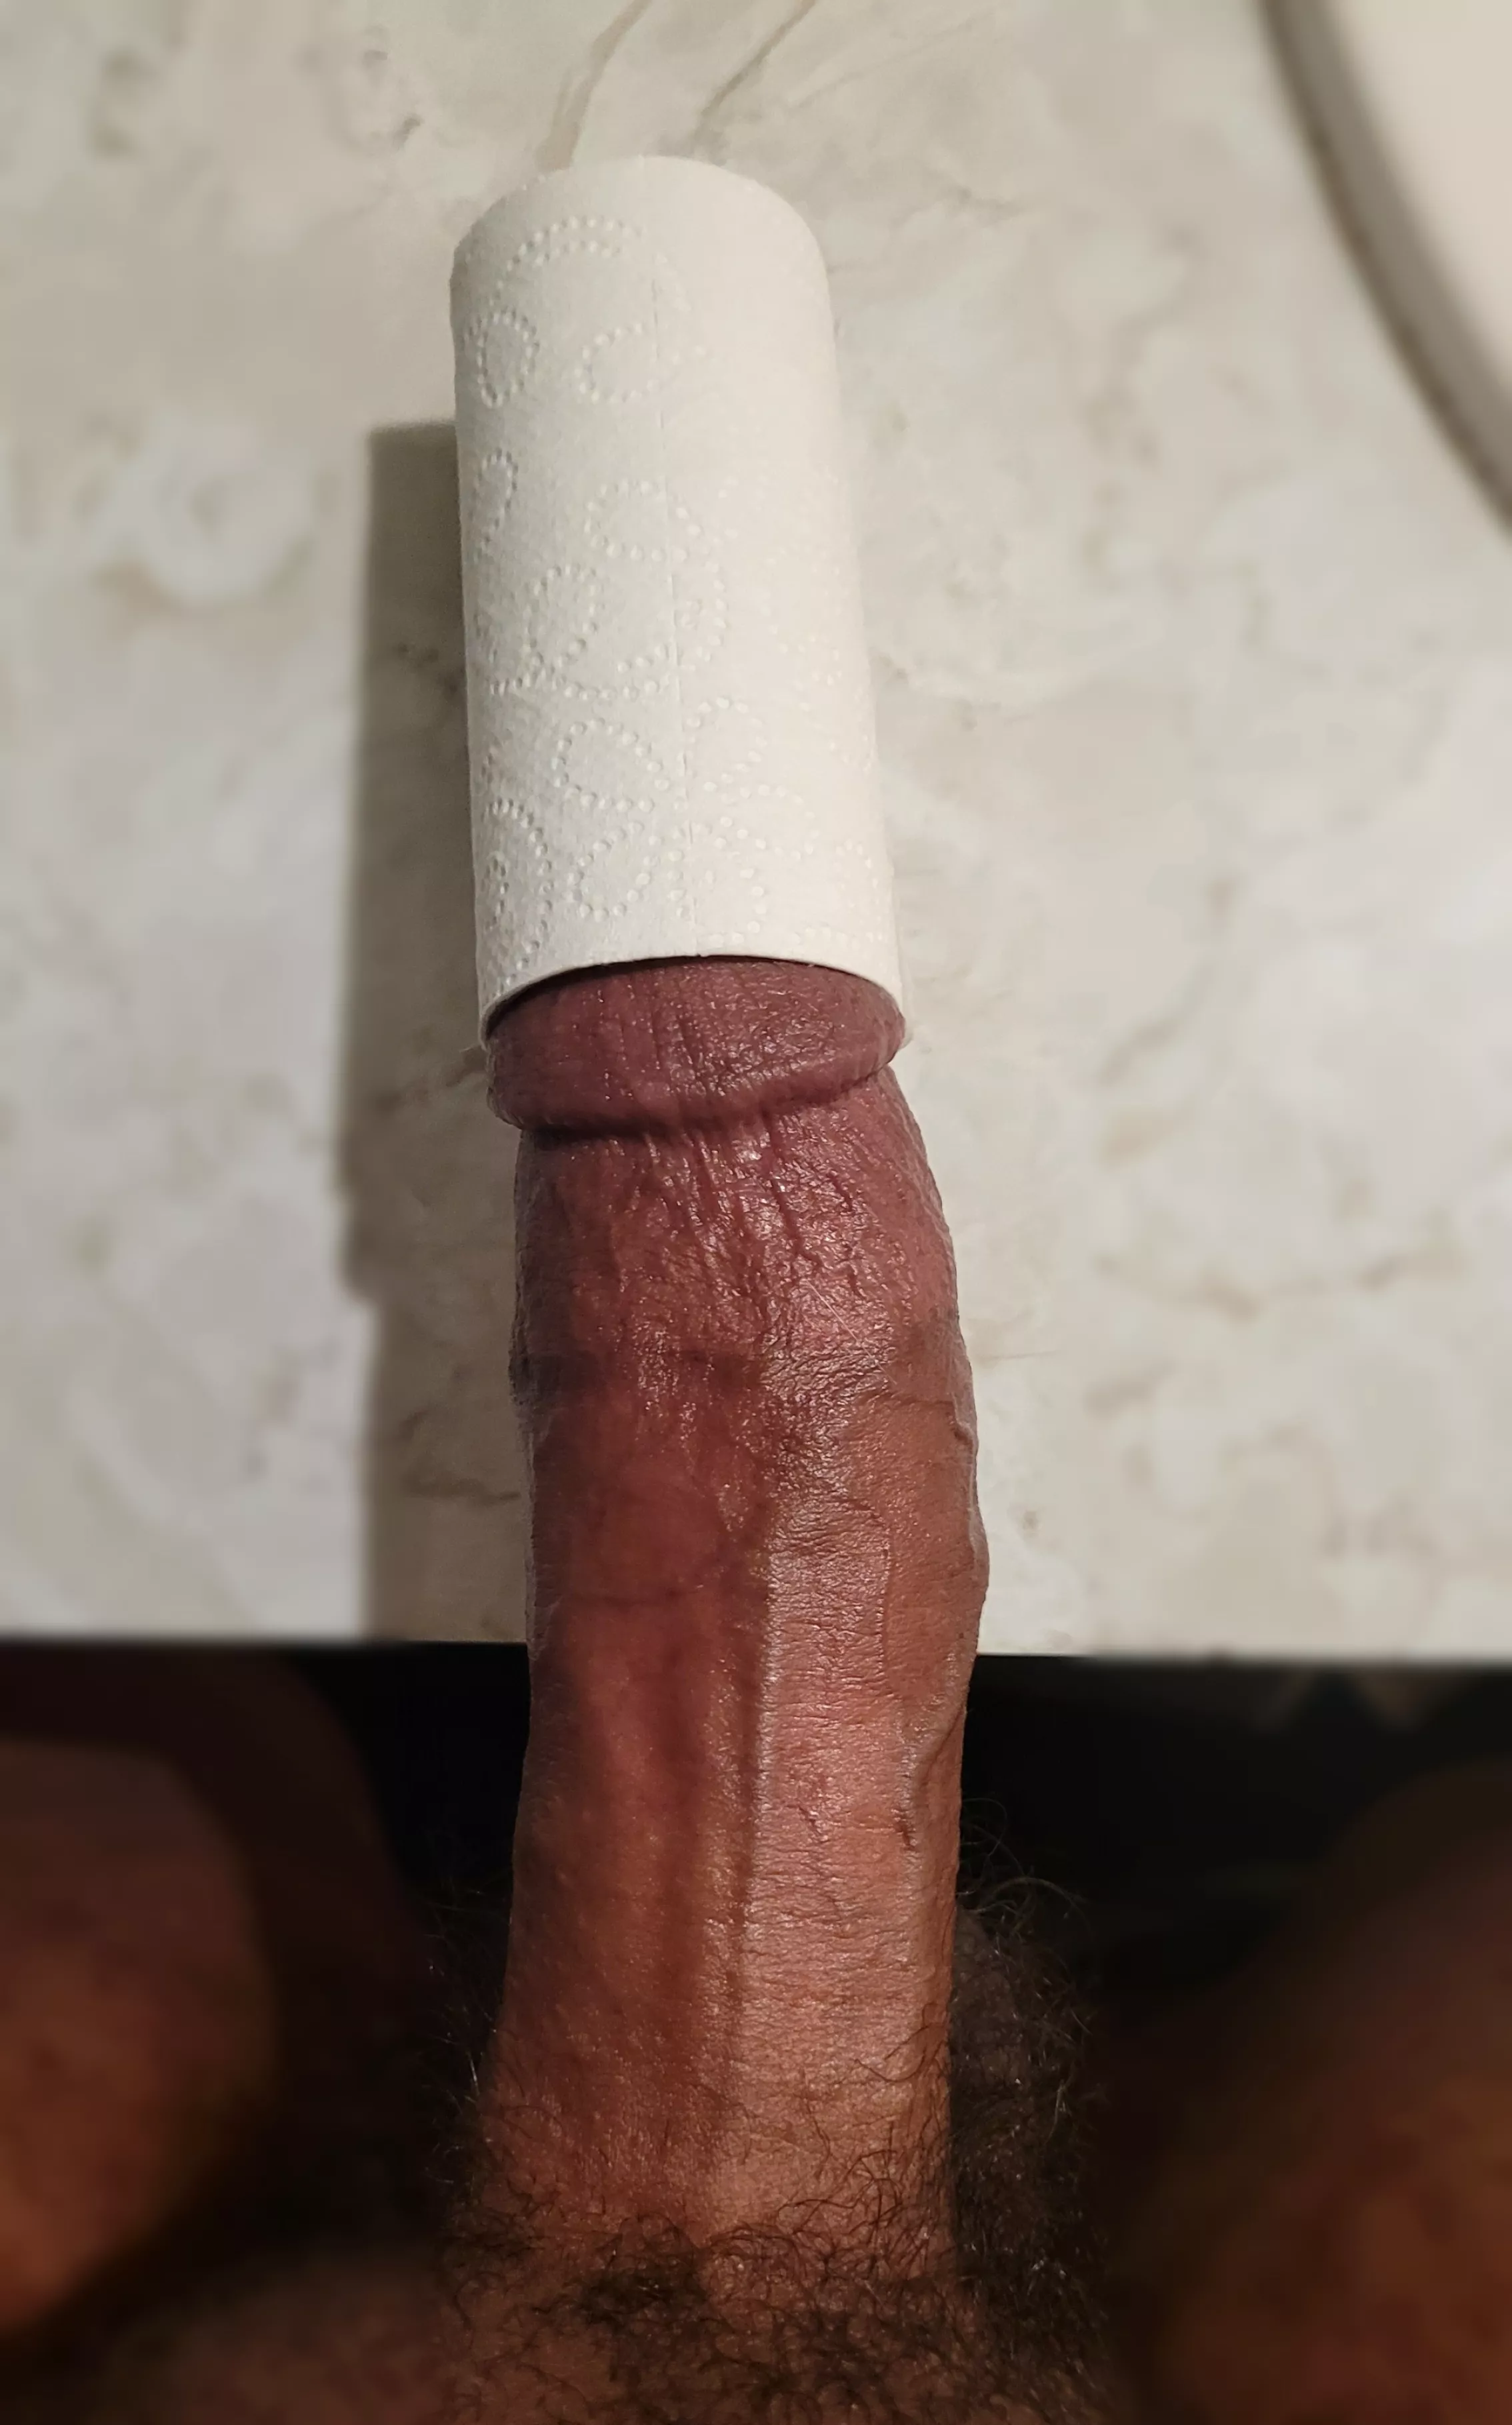 My dick wont fit